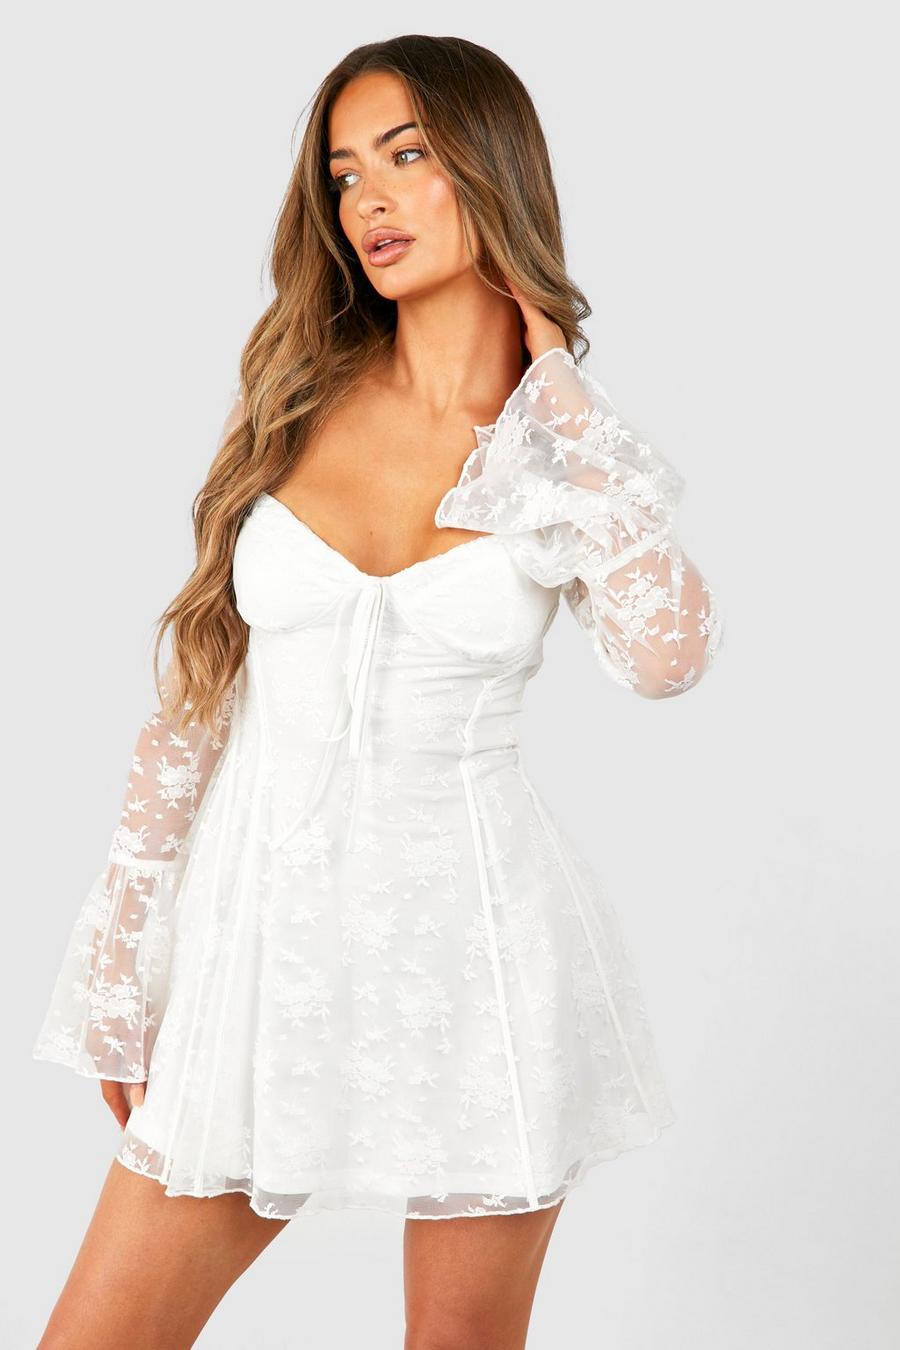 Mamalicious Maternity broderie mini dress with frill sleeves in white